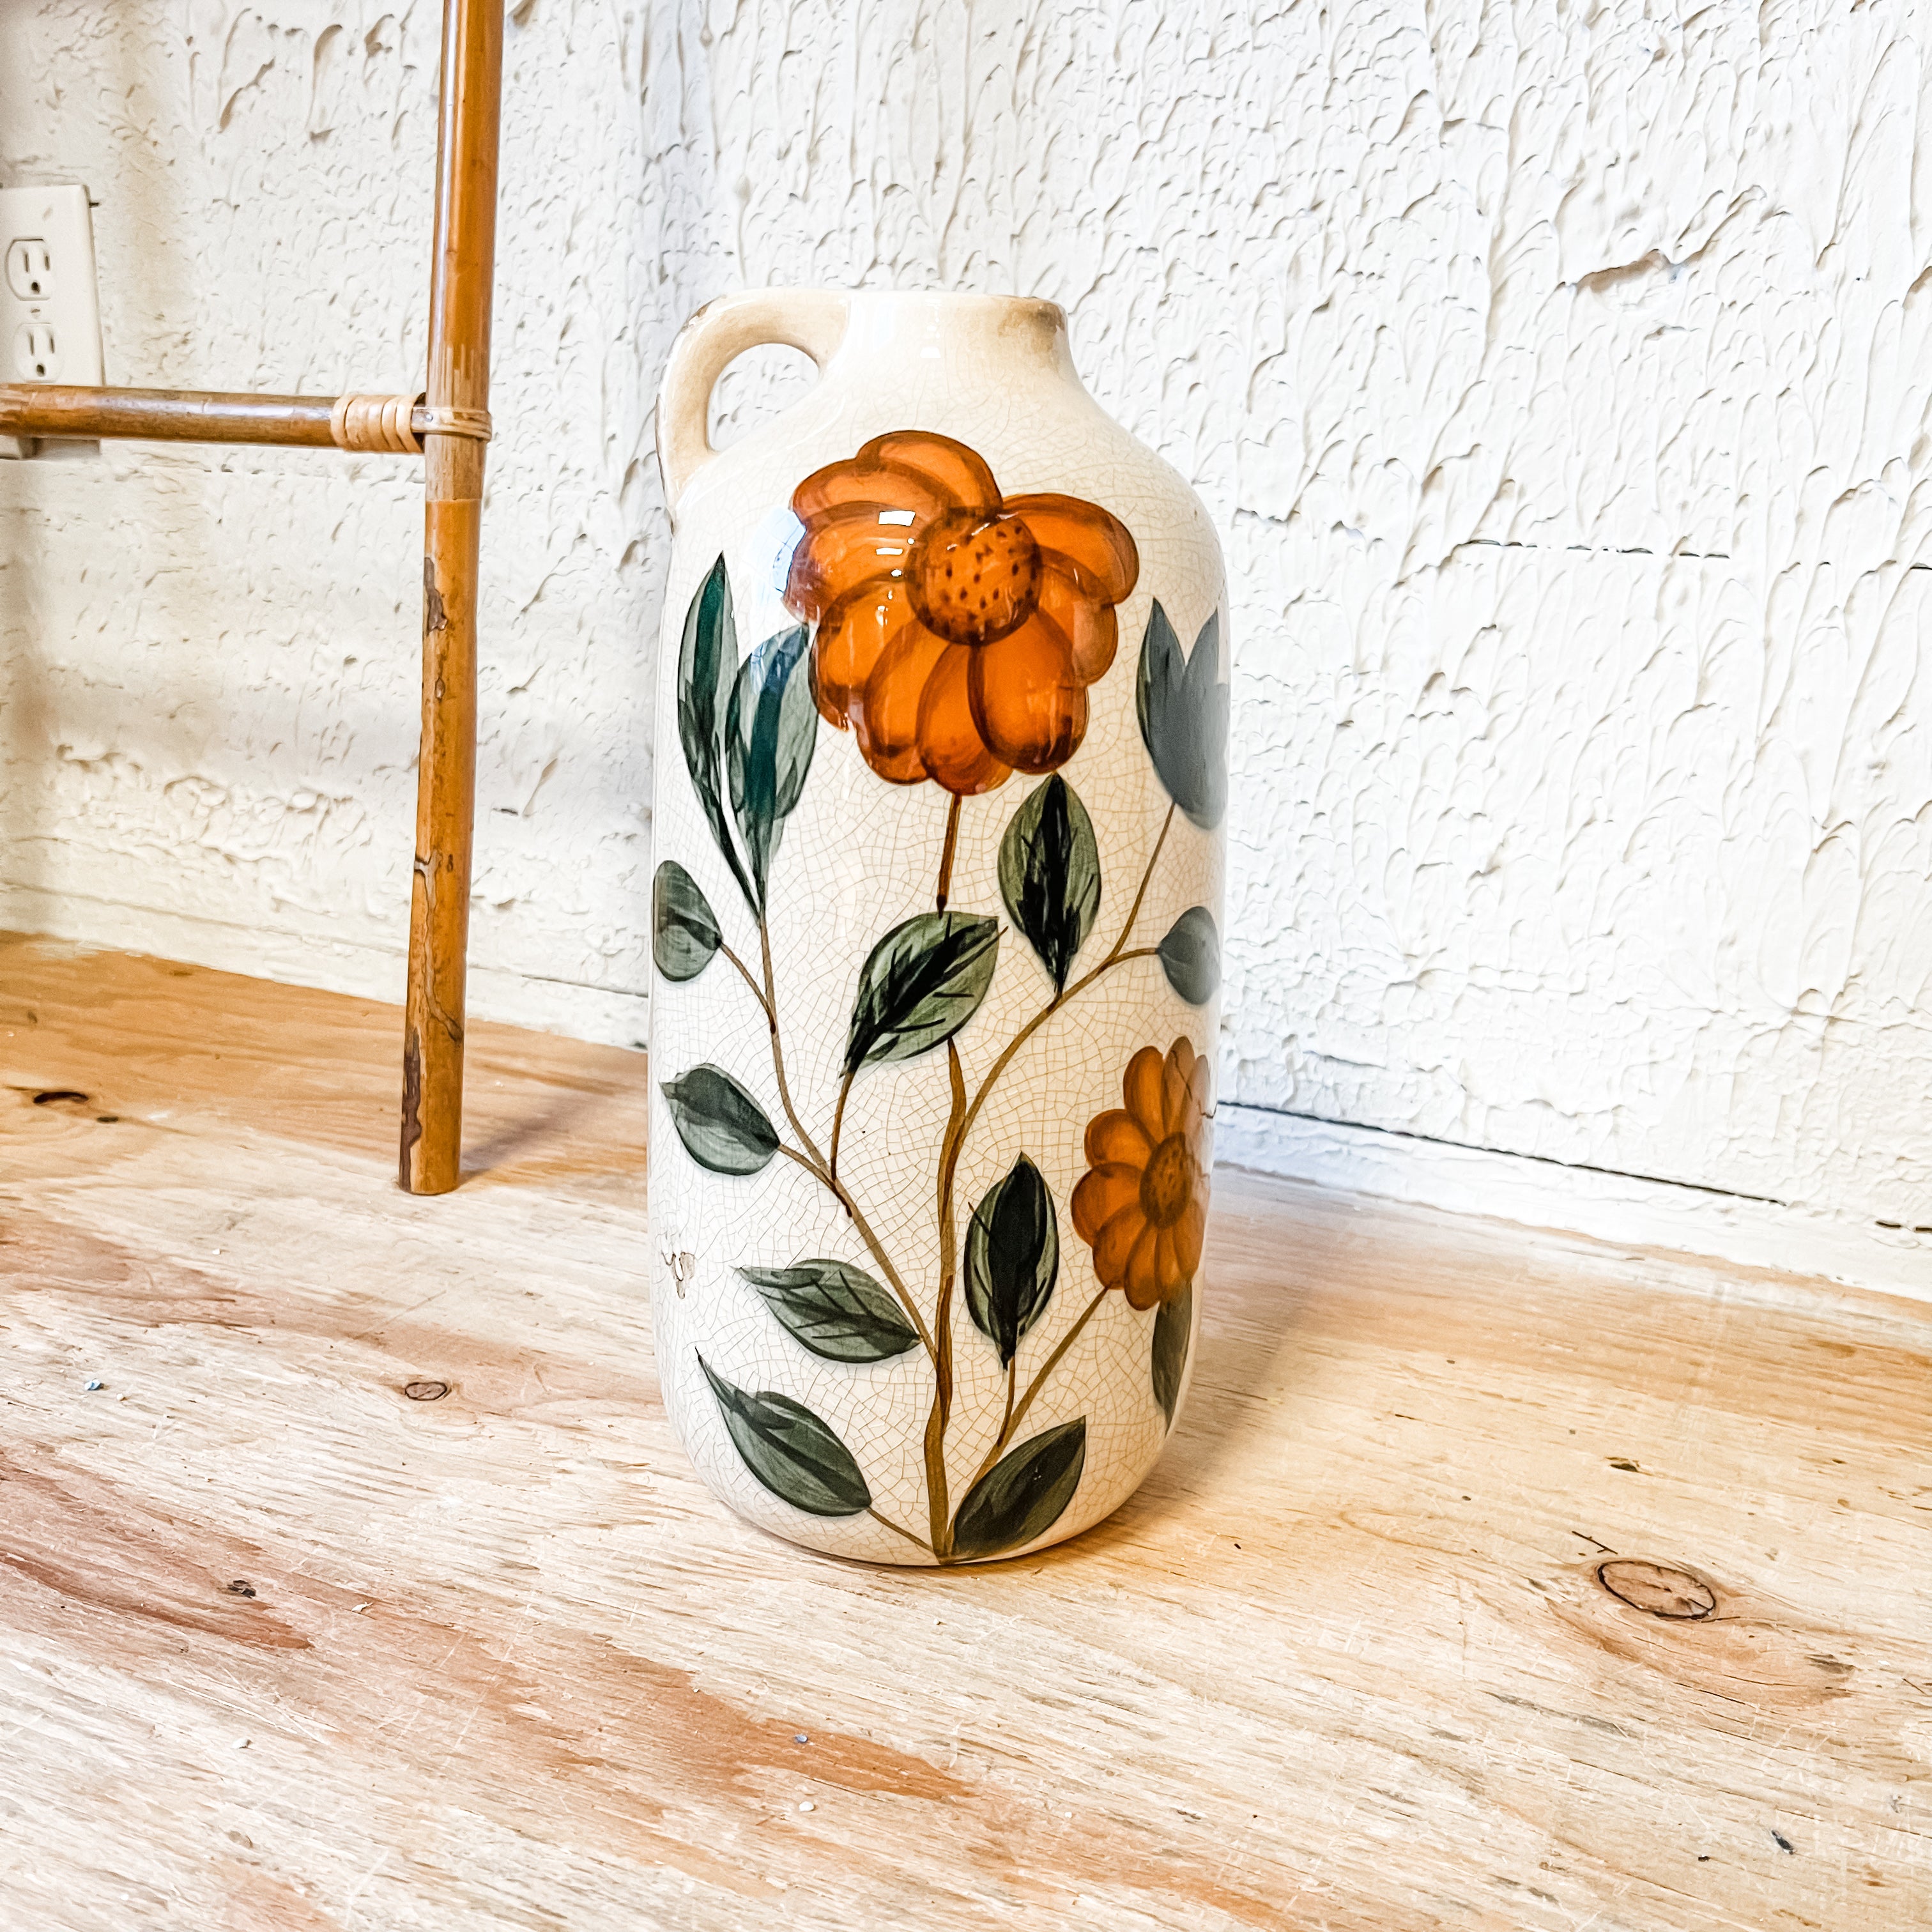 12” high ceramic hand painted floral vase the rustic barn ct